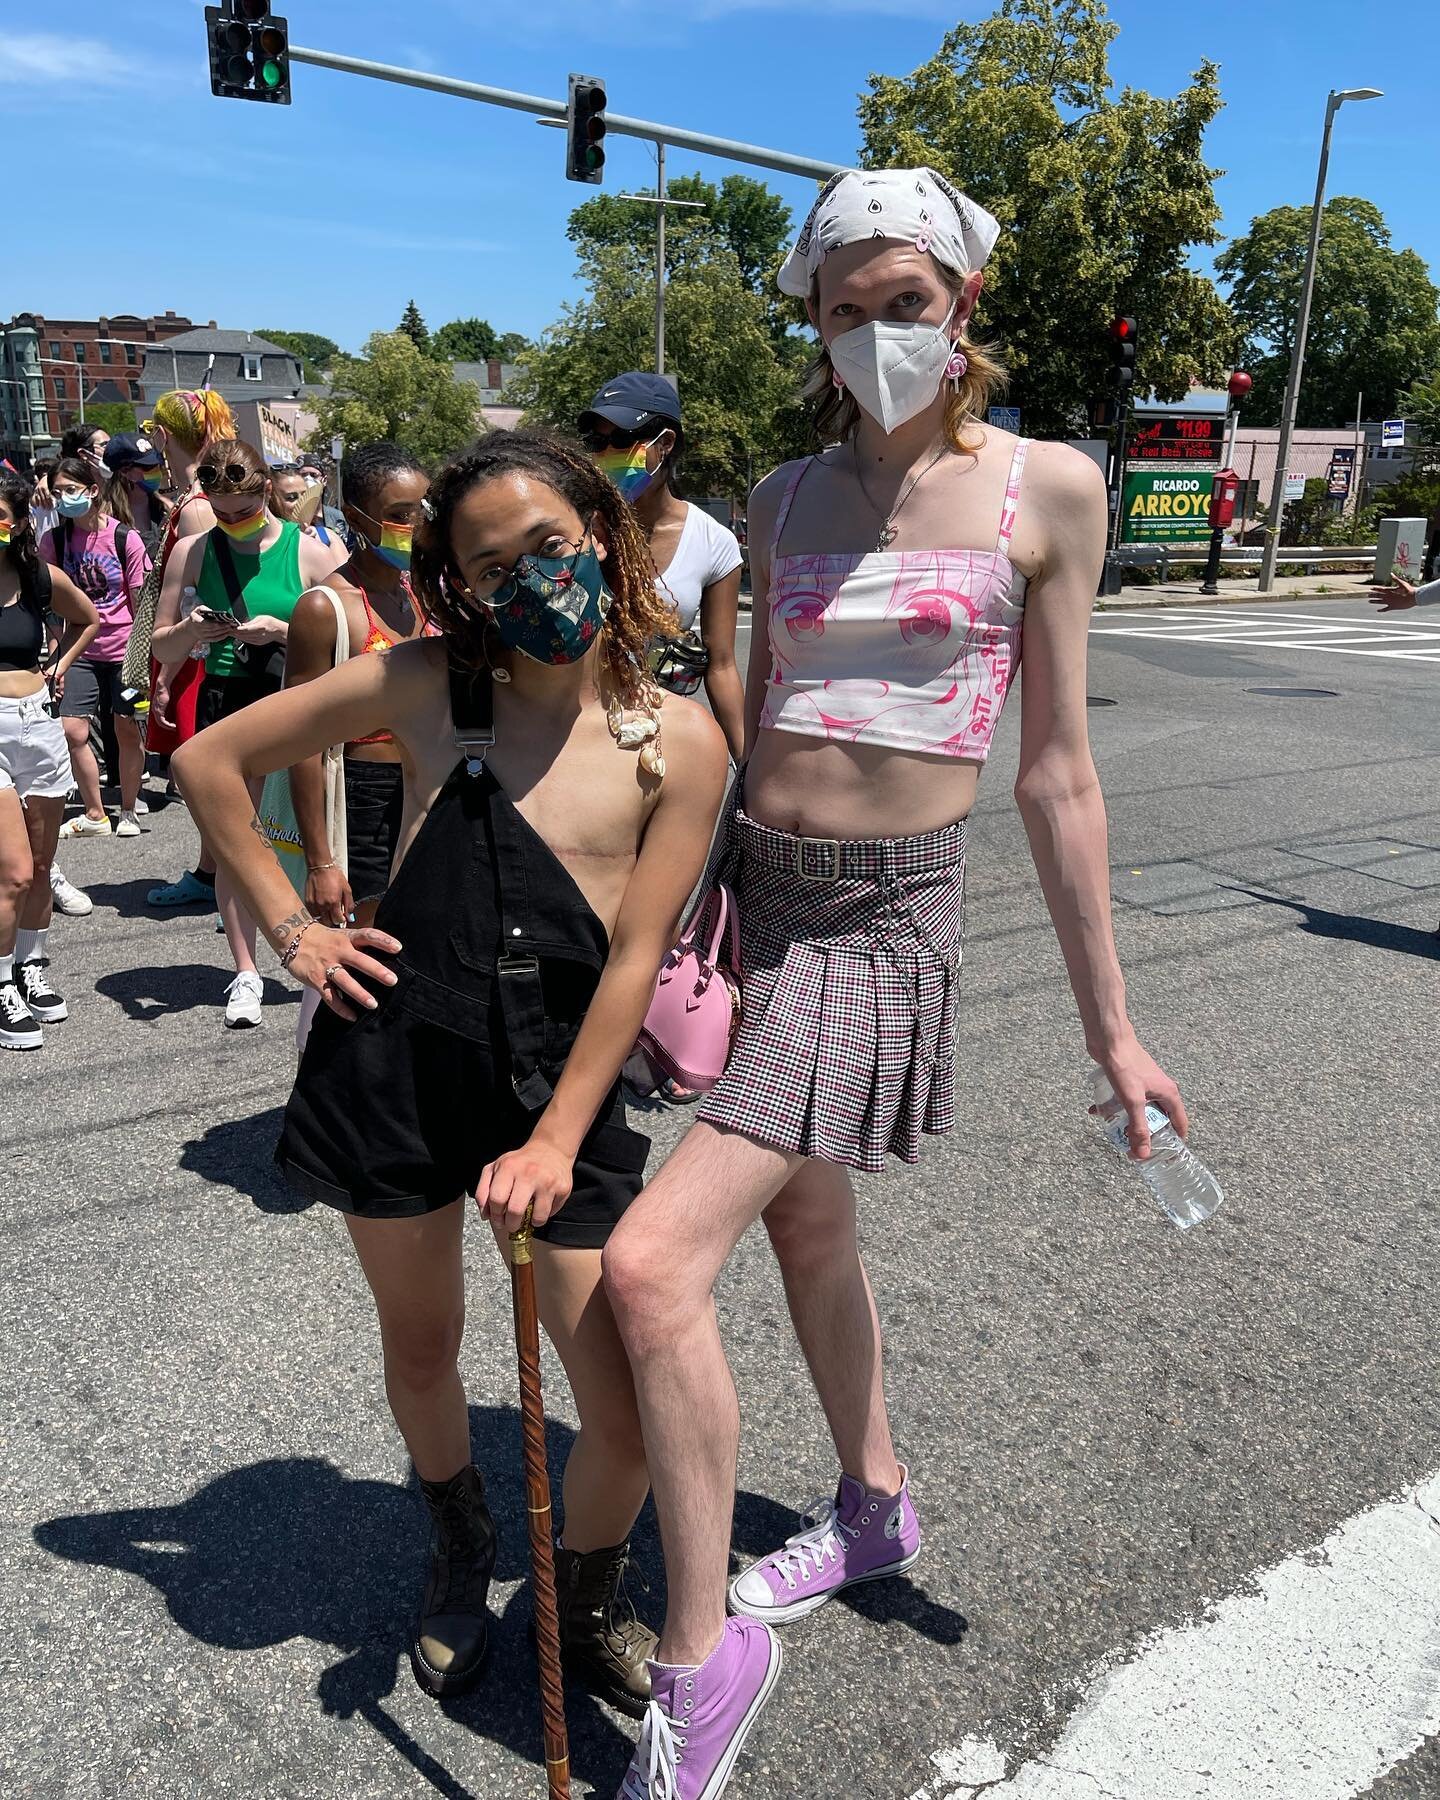 Today&rsquo;s @transresistancema March and Festival was as warm and welcoming as it was fashionable! See more looks at link in bio.

📸 @sonnyoram 

#trans #transresistance #pride #transpride #transfashion #queerfashion #qwear